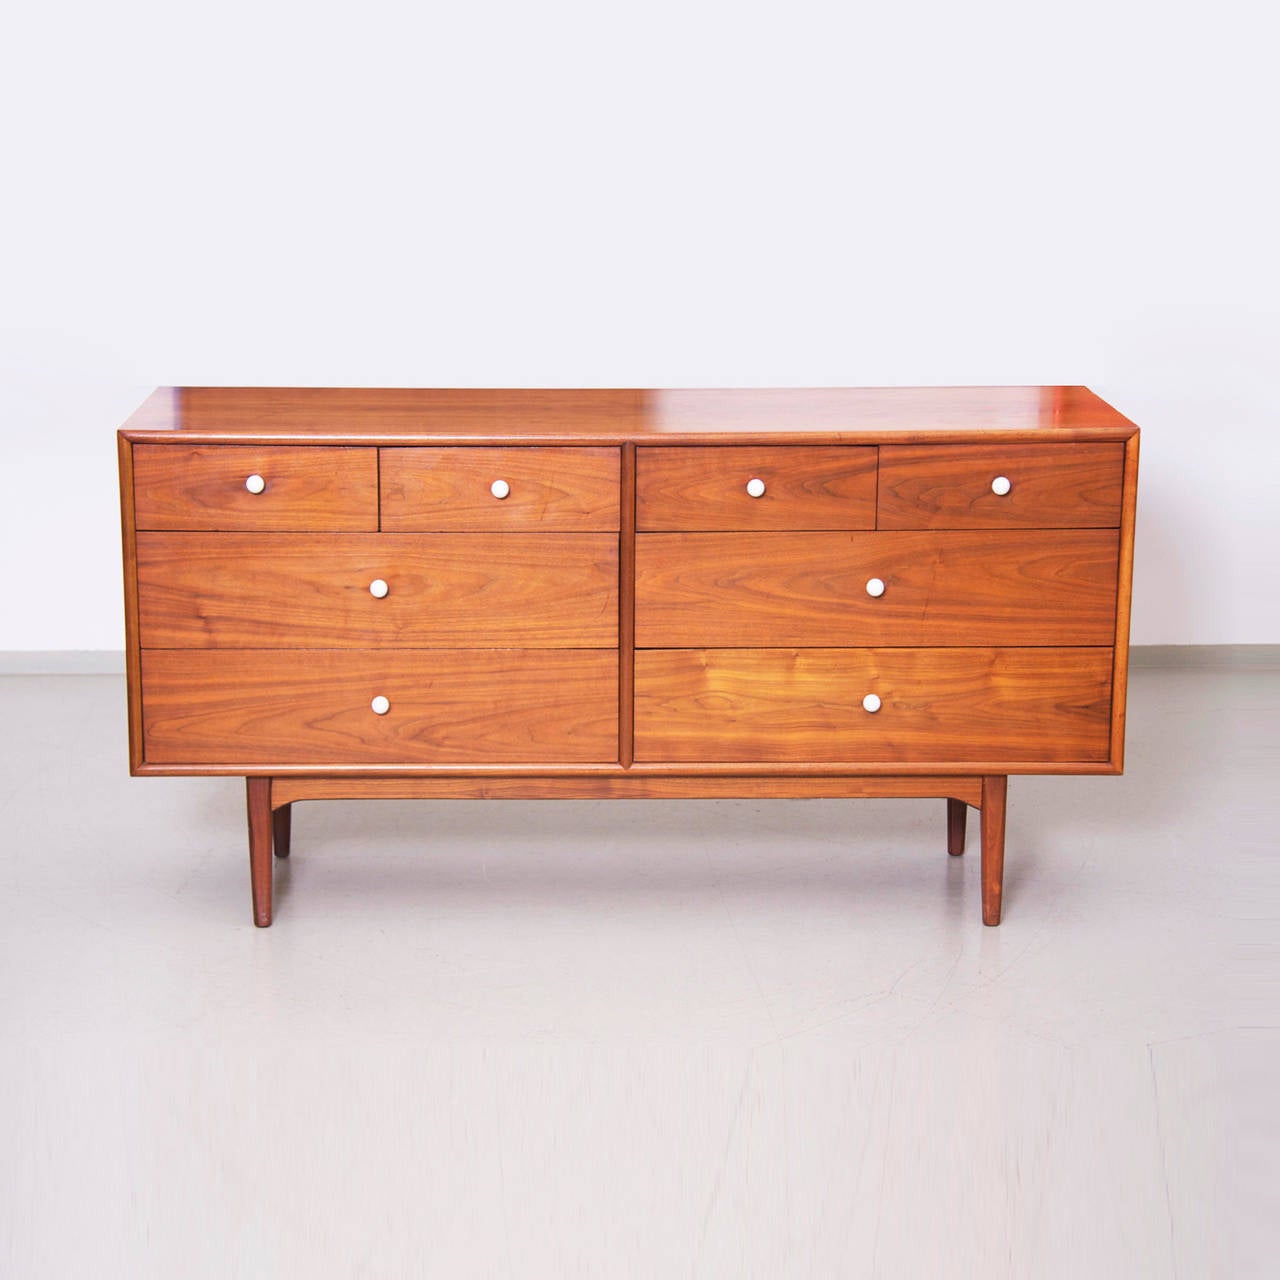 Fabulous Kipp Steward Drexel Declaration walnut credenza. This piece has an amazing vintage patina, the original finish glows the beautiful graining. The hardware is the Classic white porcelain balls with the brass details. All dovetail drawer